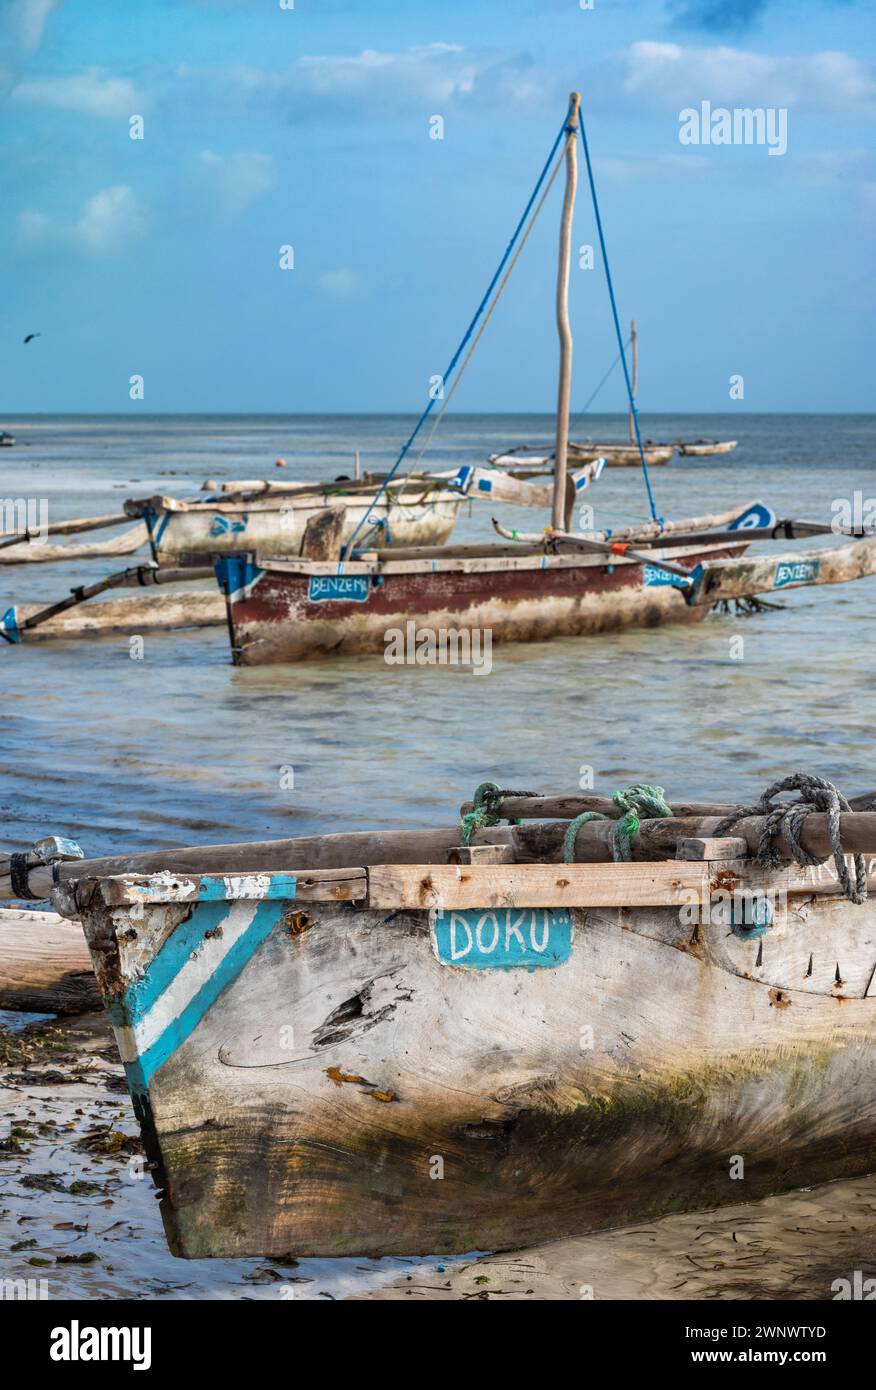 A traditional wooden dhow outrigger boat named after Jeremy Doku, the Manchester City footballer. Jambiani, Zanzibar, Tanzania. Stock Photo